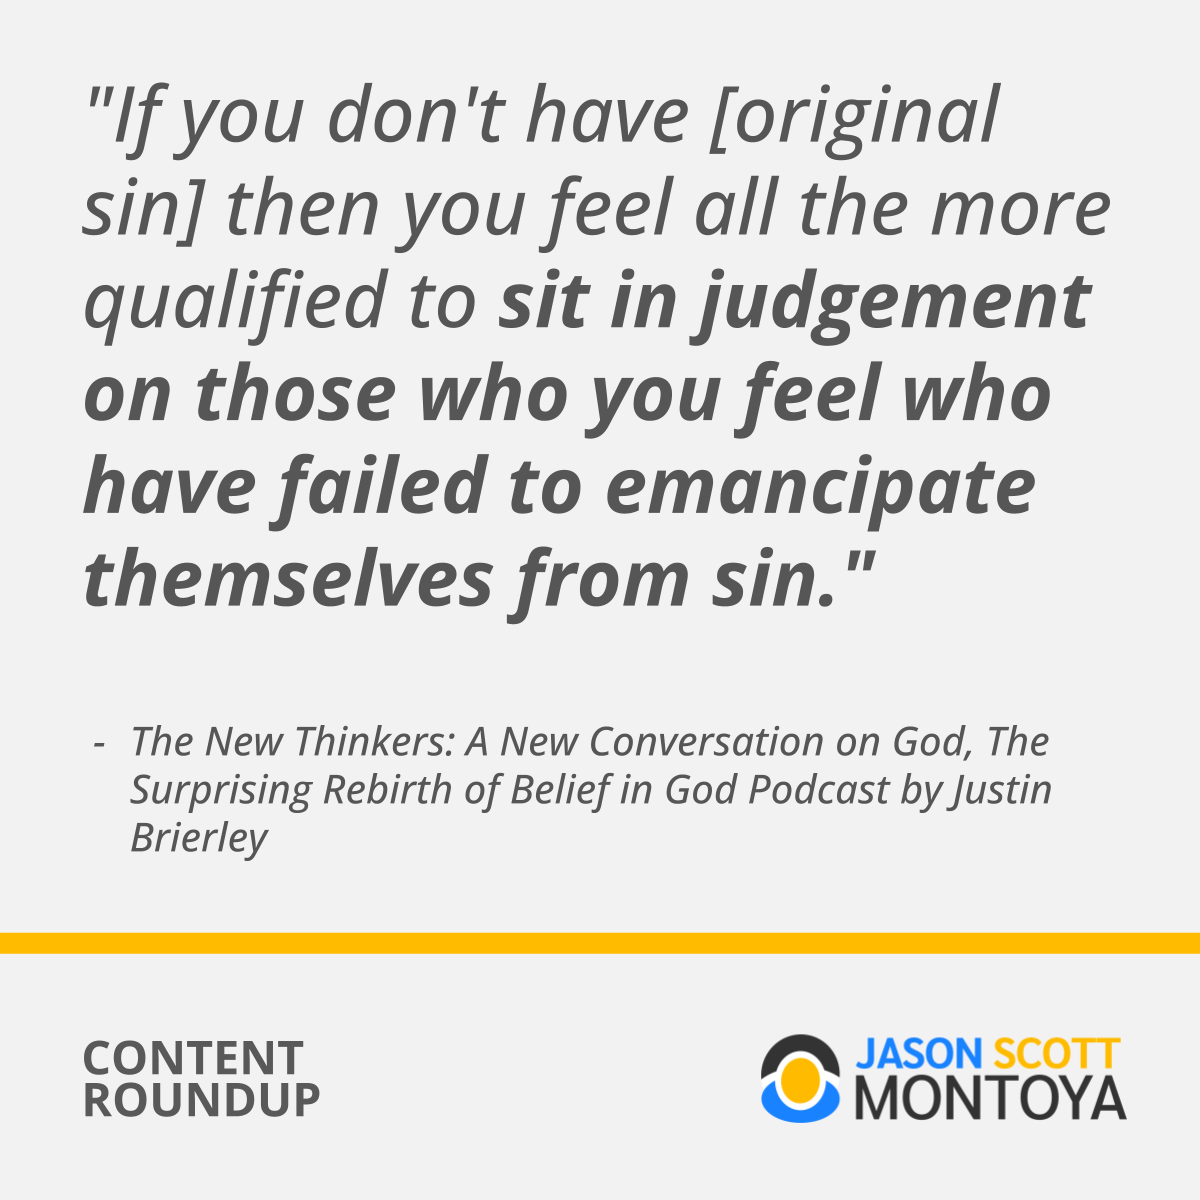 "If you don't have [original sin] then you feel all the more qualified to sit in judgement on those who you feel who have failed to emancipate themselves from sin."  The New Thinkers: A New Conversation on God, The Surprising Rebirth of Belief in God Podcast by Justin Brierley